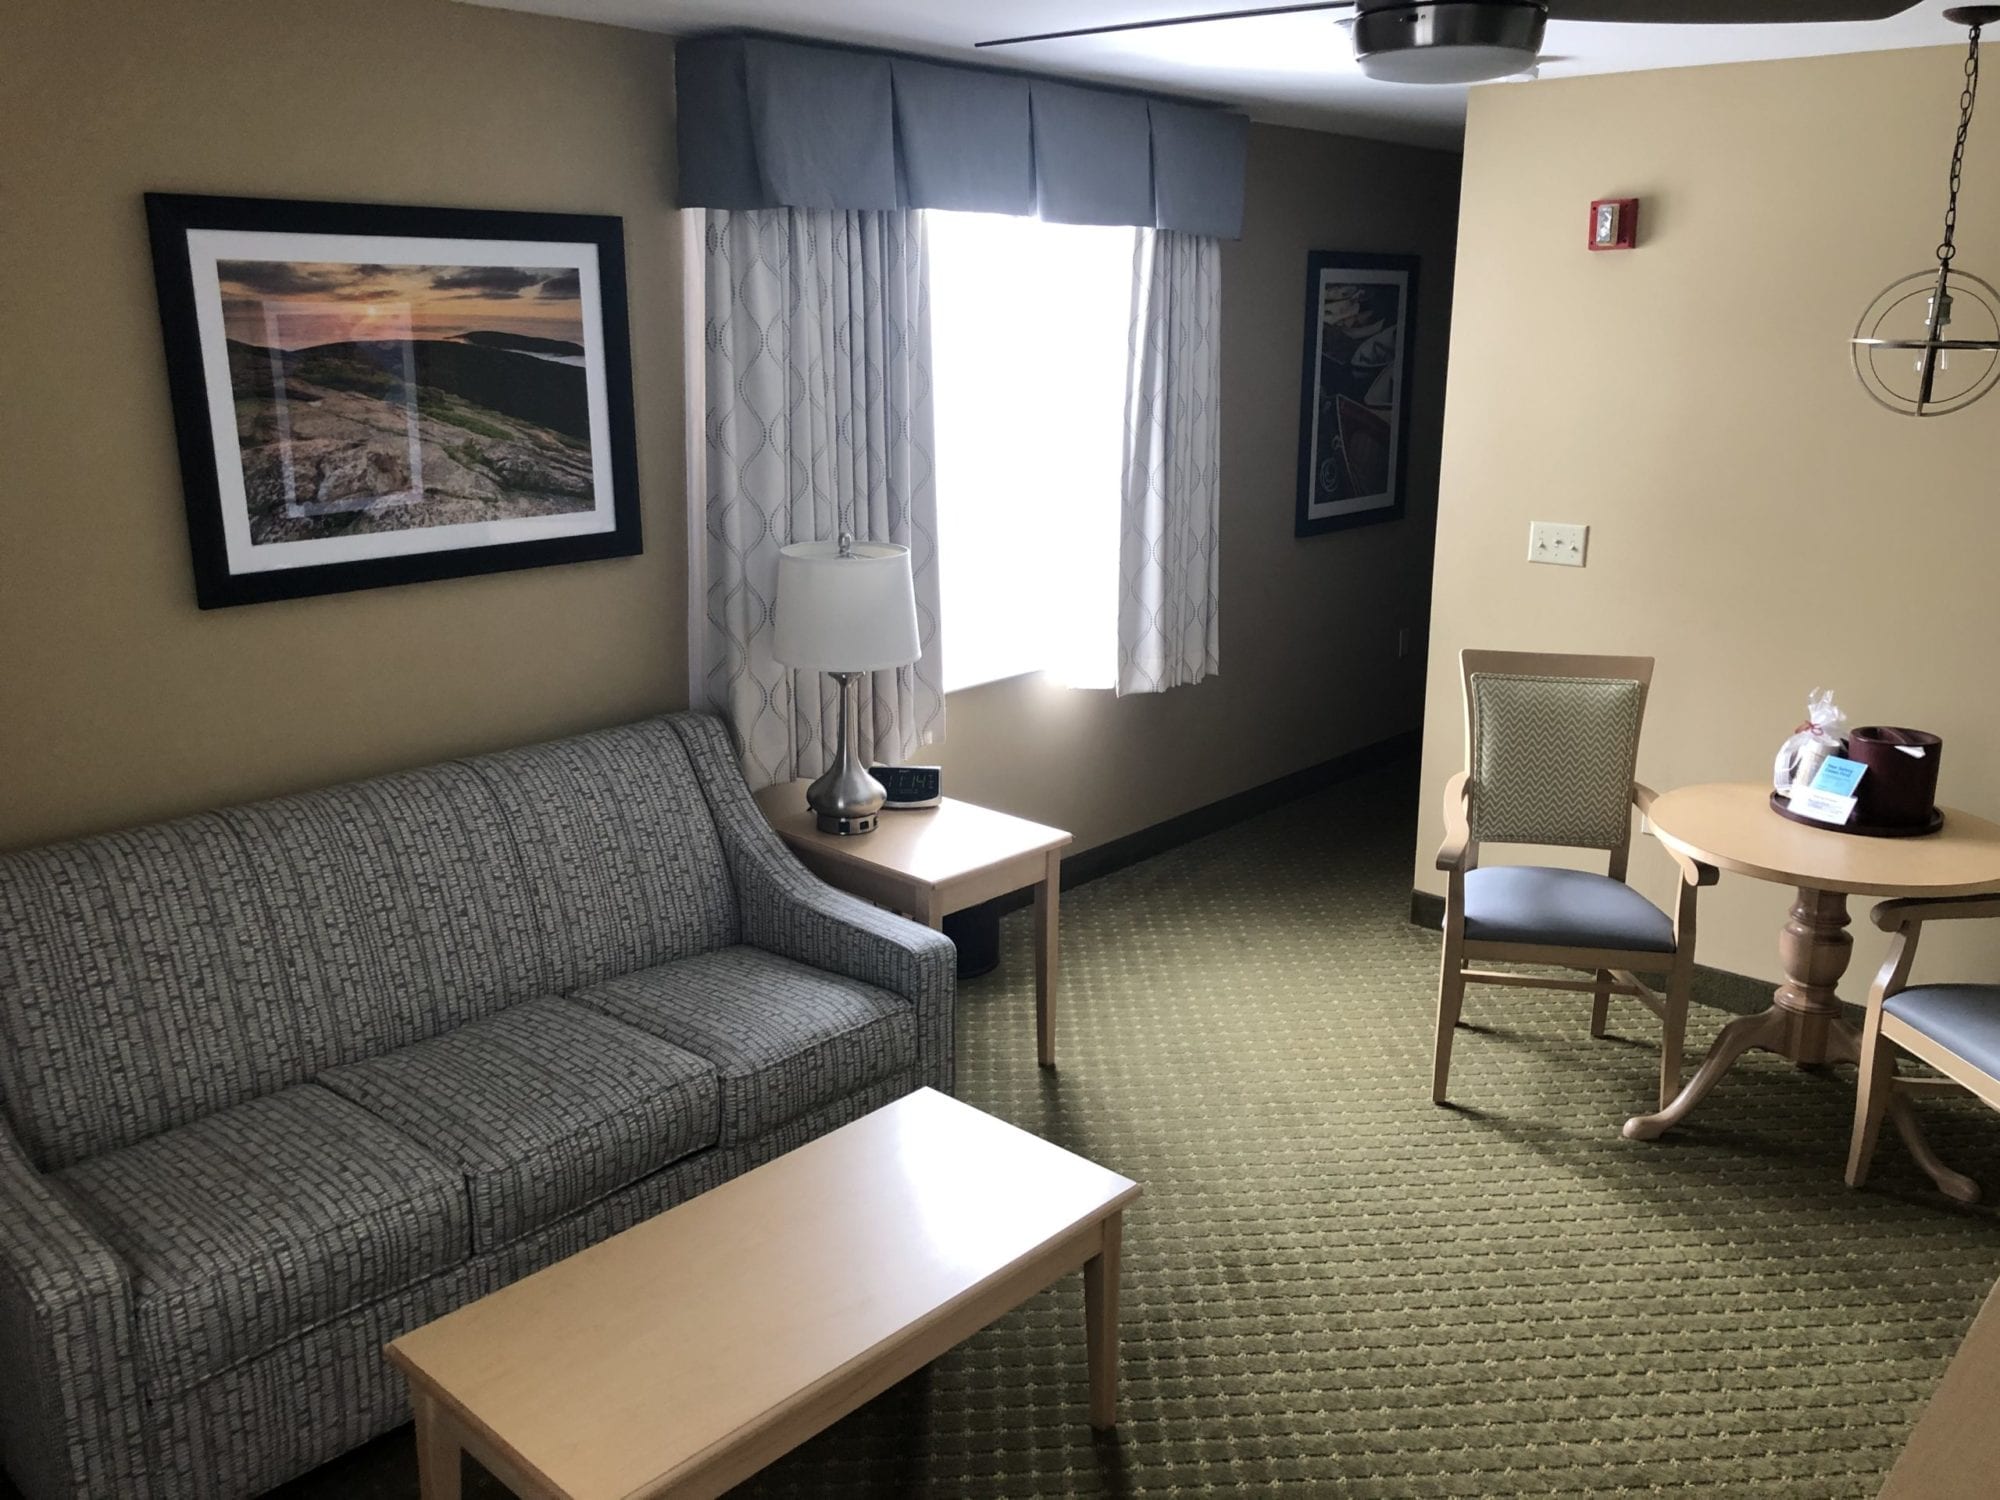 Photo of the living room of the Accessible King Suite at the Acadia Inn.